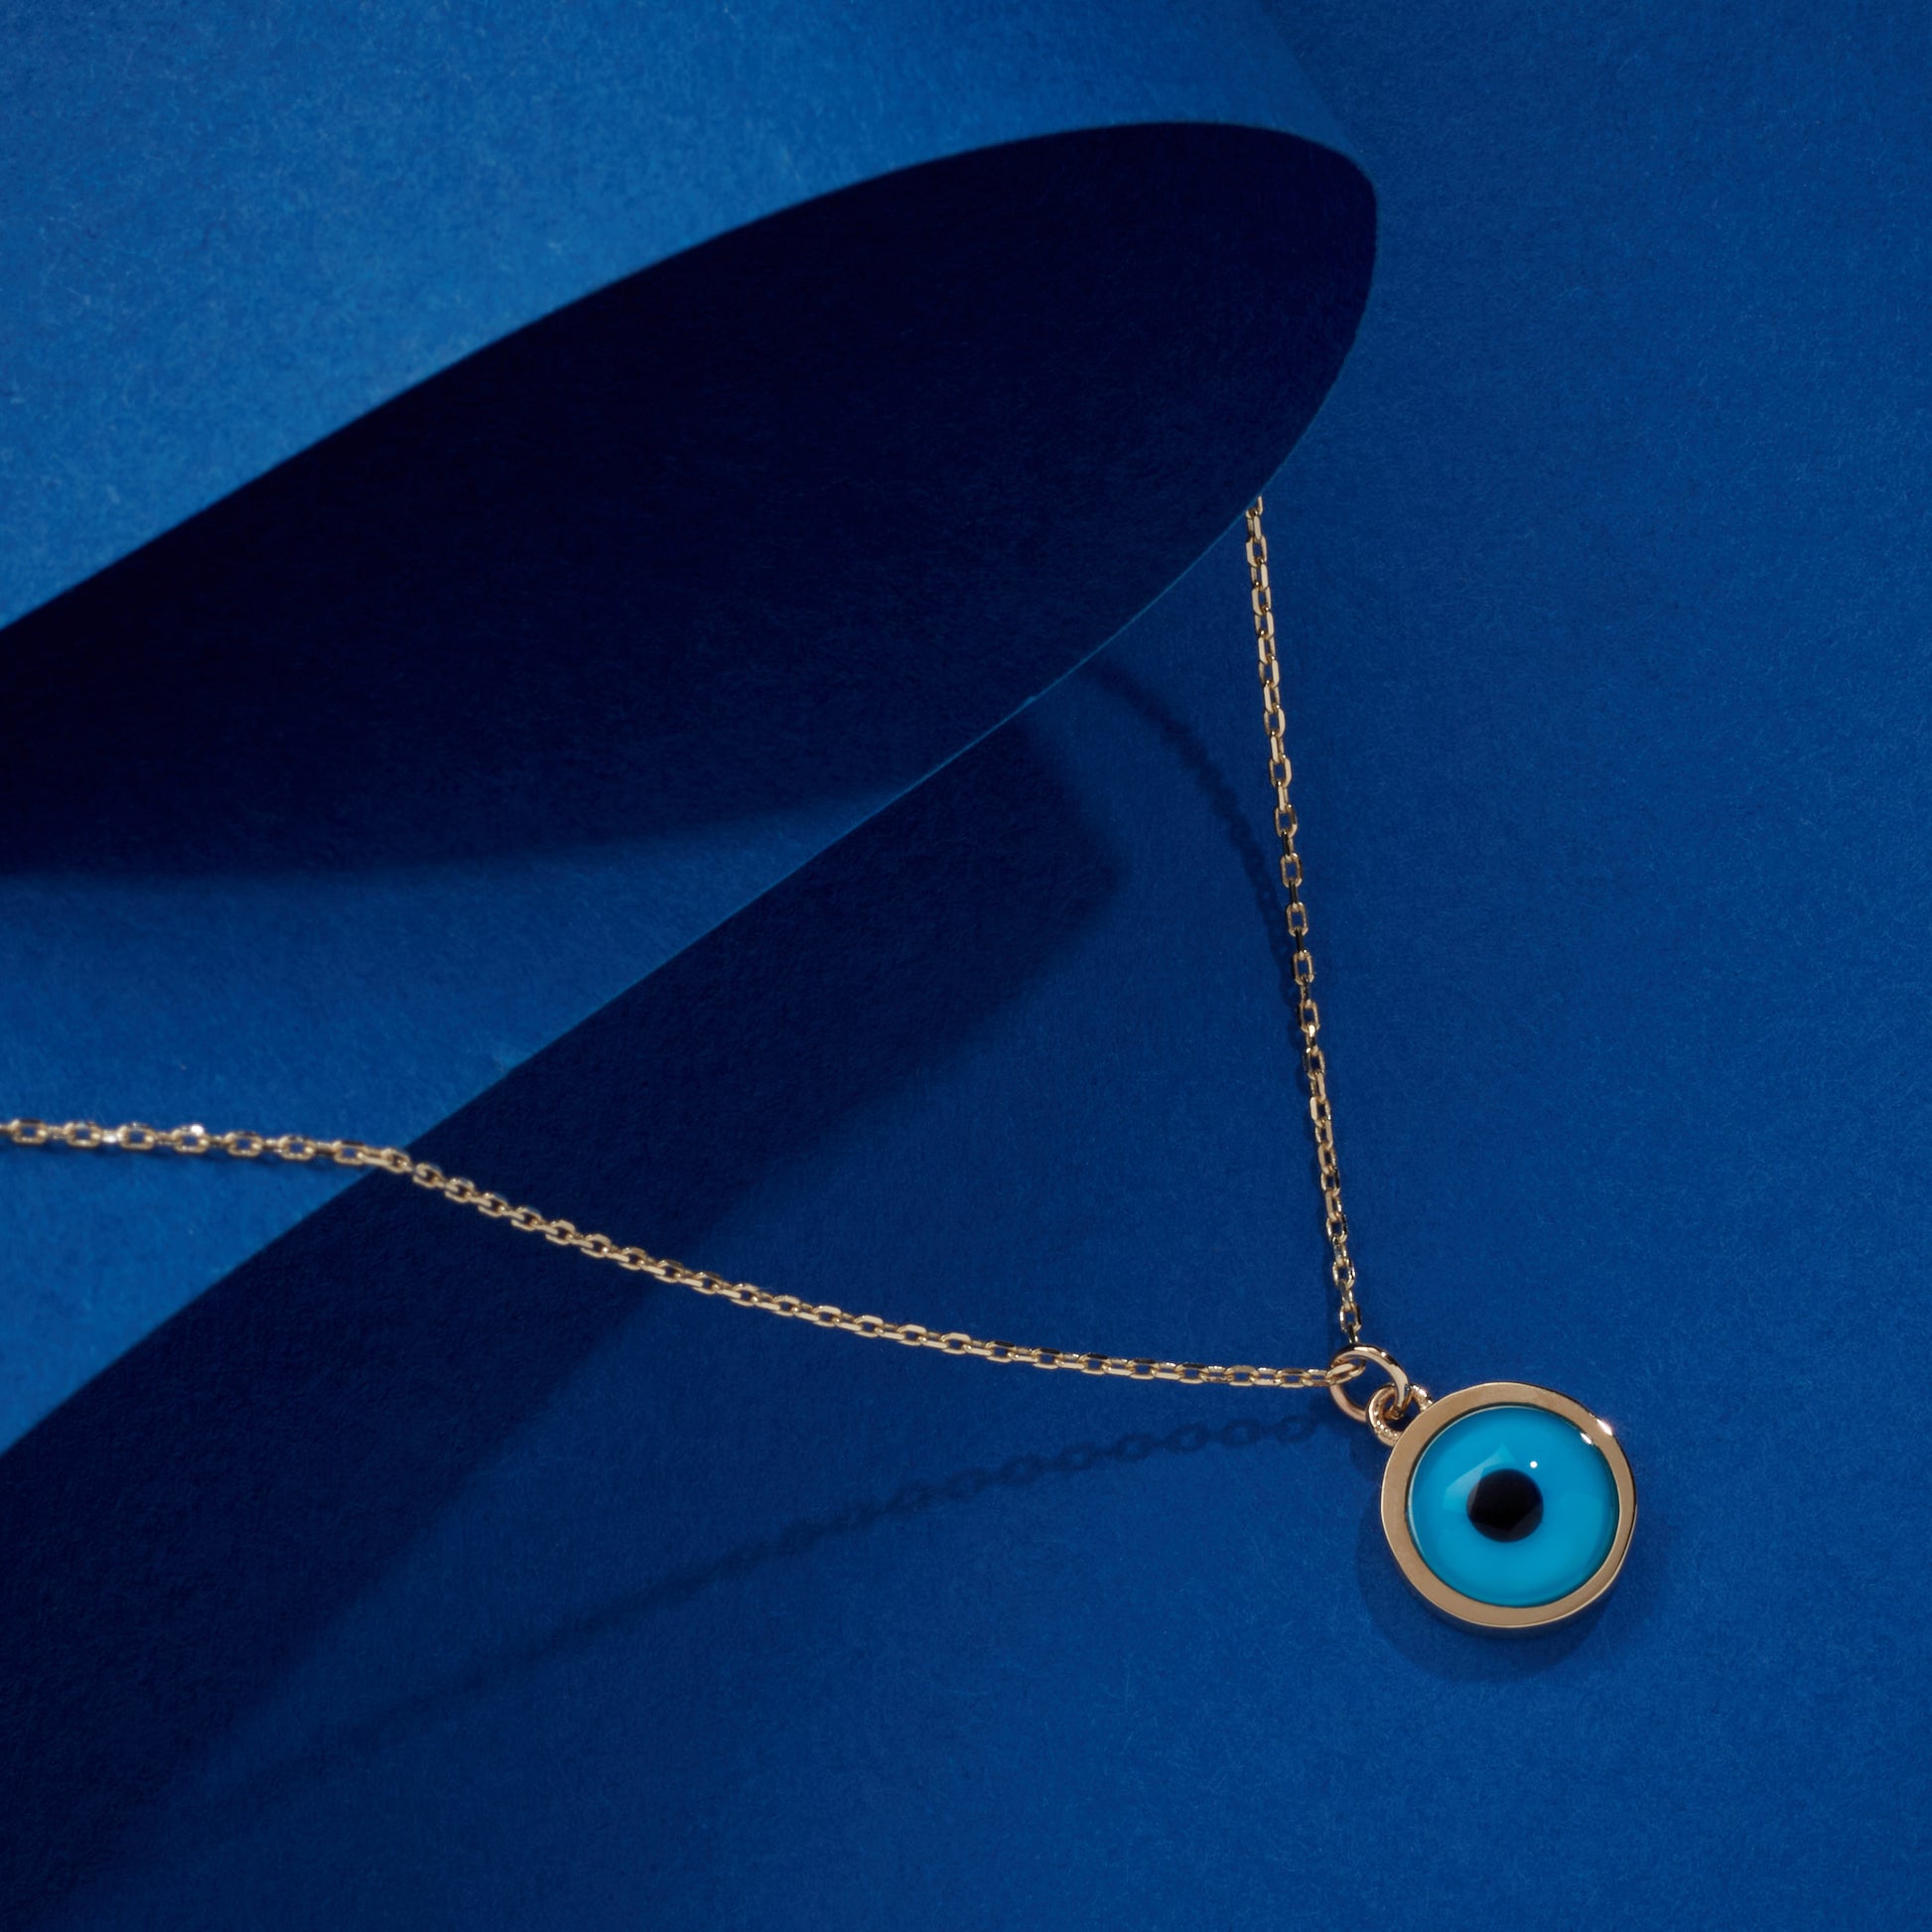 protection necklace, evil eye necklace, evil eye jewelry, solid gold pendant, solid gold necklace, 14k gold necklace, solid gold evil eye, blue gold evil eye, 14k round evil eye, evil eye pendant, dainty gold jewelry, gold necklace womens, kabbalah necklace, 